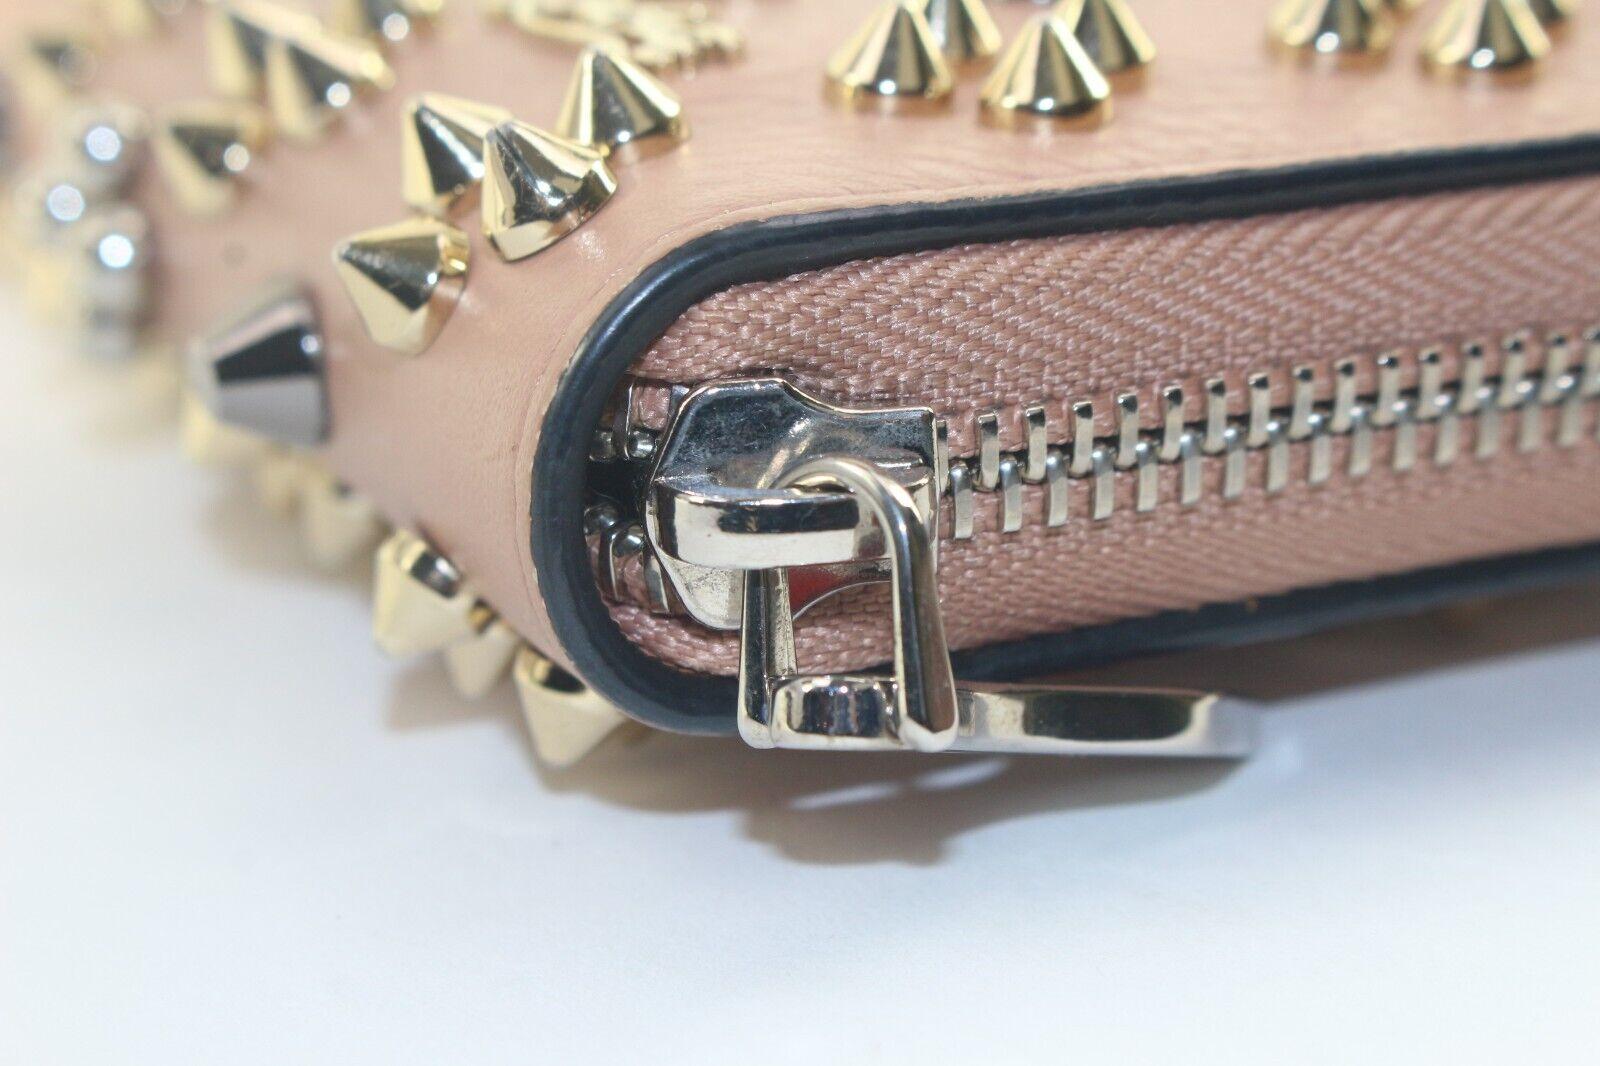 Christian Louboutin Panettone Loubinthesky Zippy Wallet 2CL1129K
Date Code/Serial Number: N/A

Made In: Italy

Measurements: Length:  8